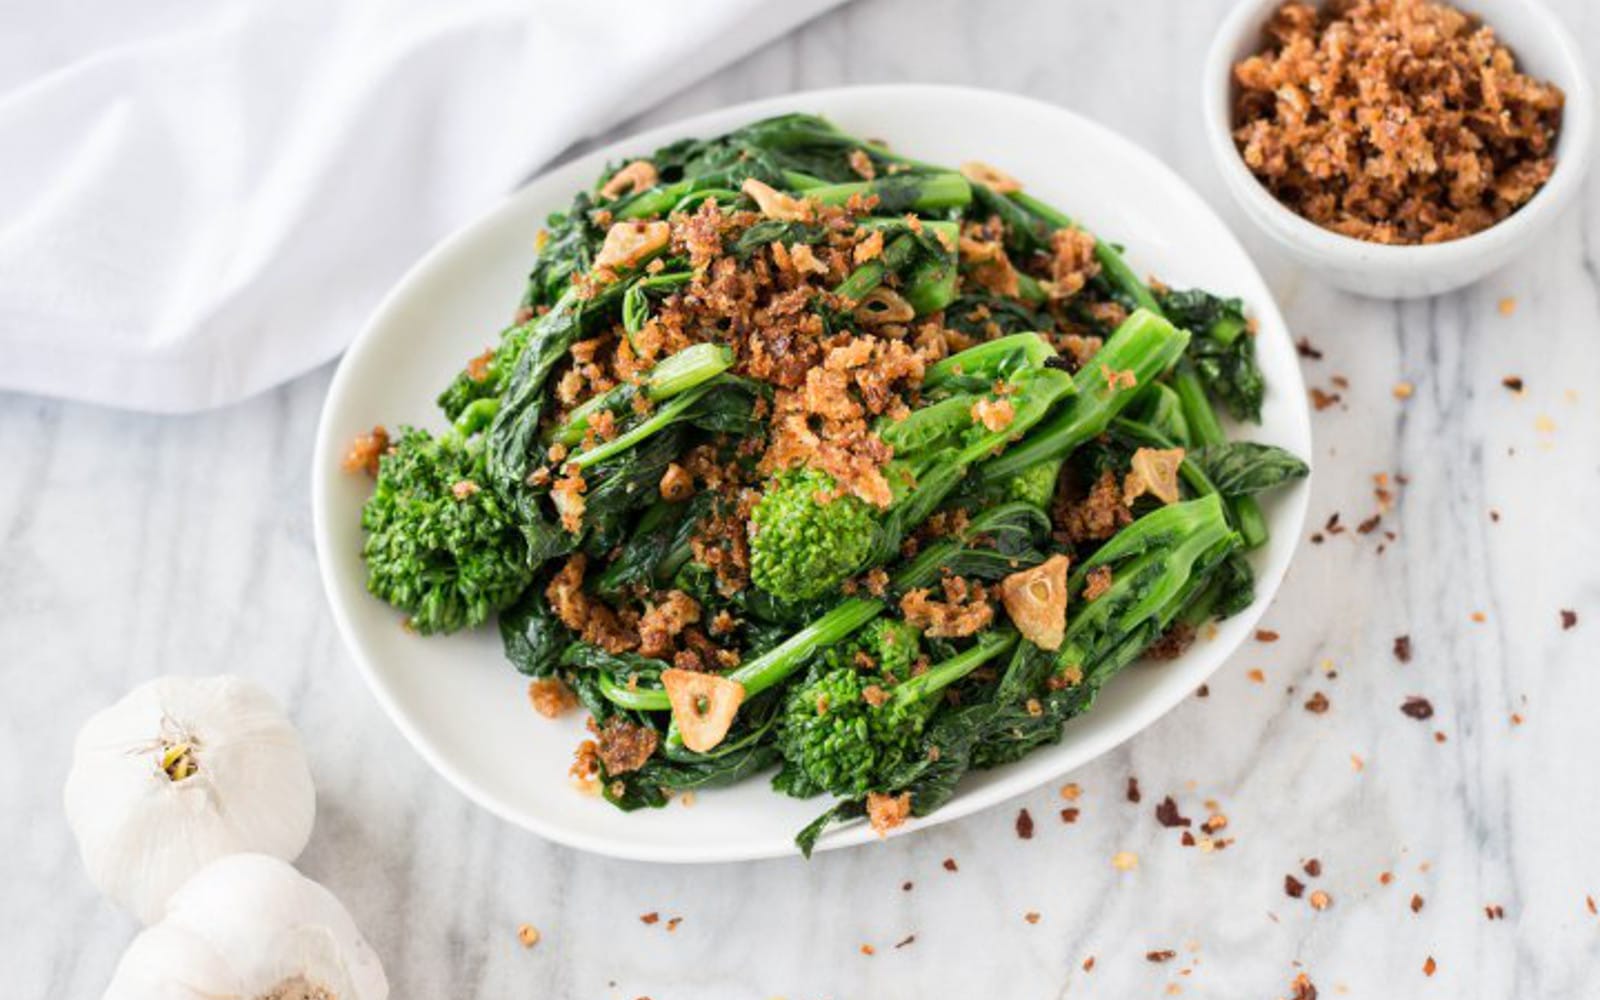 Garlicky Broccoli Rabe With Chili Breadcrumbs